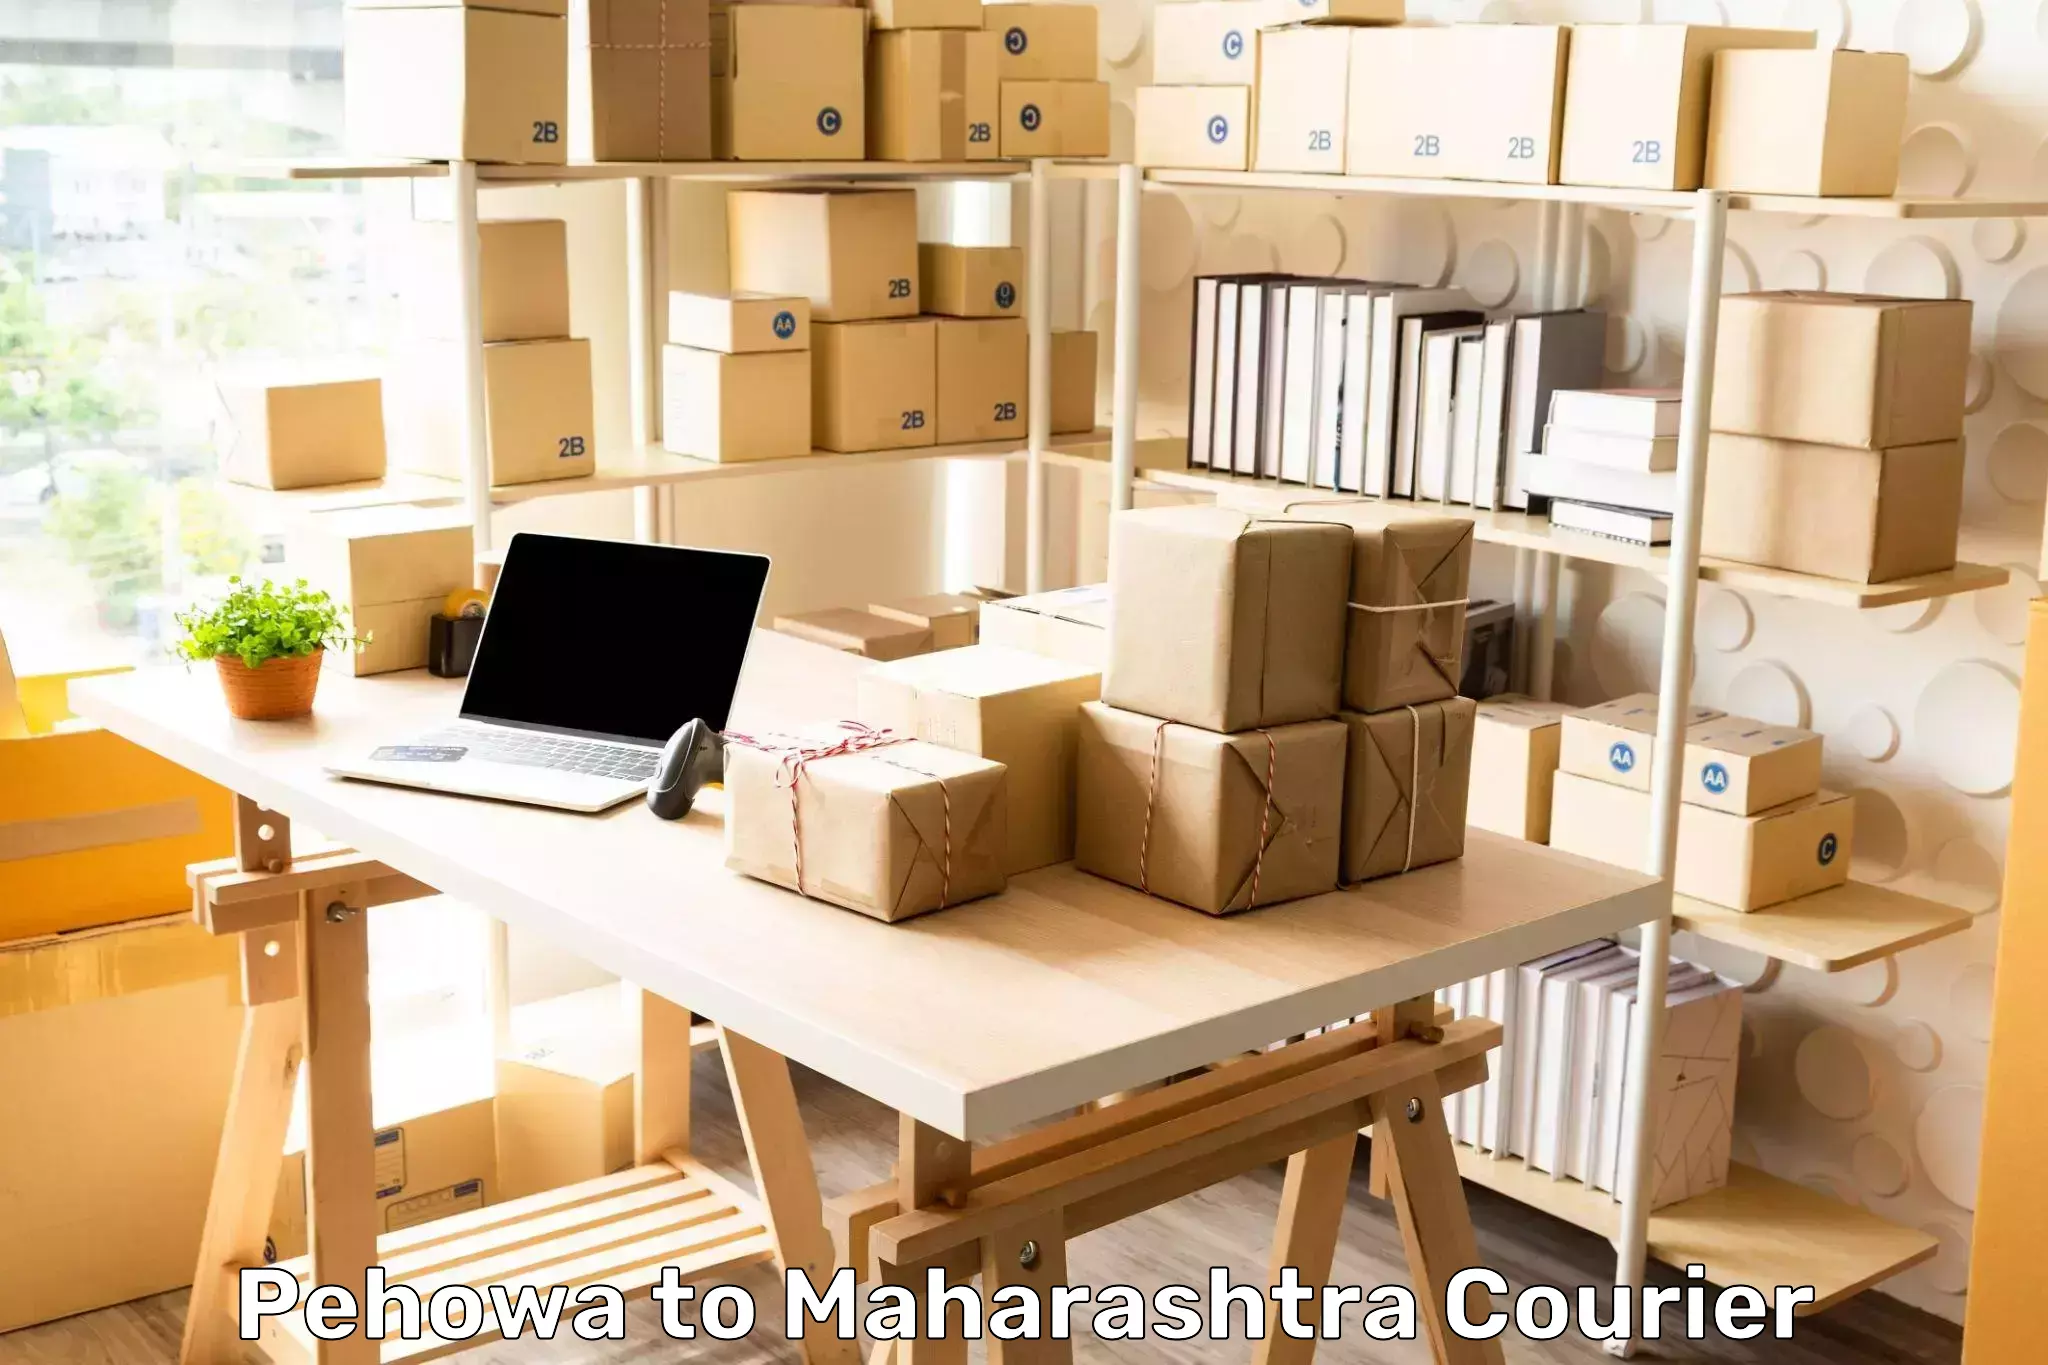 Cost-effective courier solutions Pehowa to Tata Institute of Social Sciences Mumbai